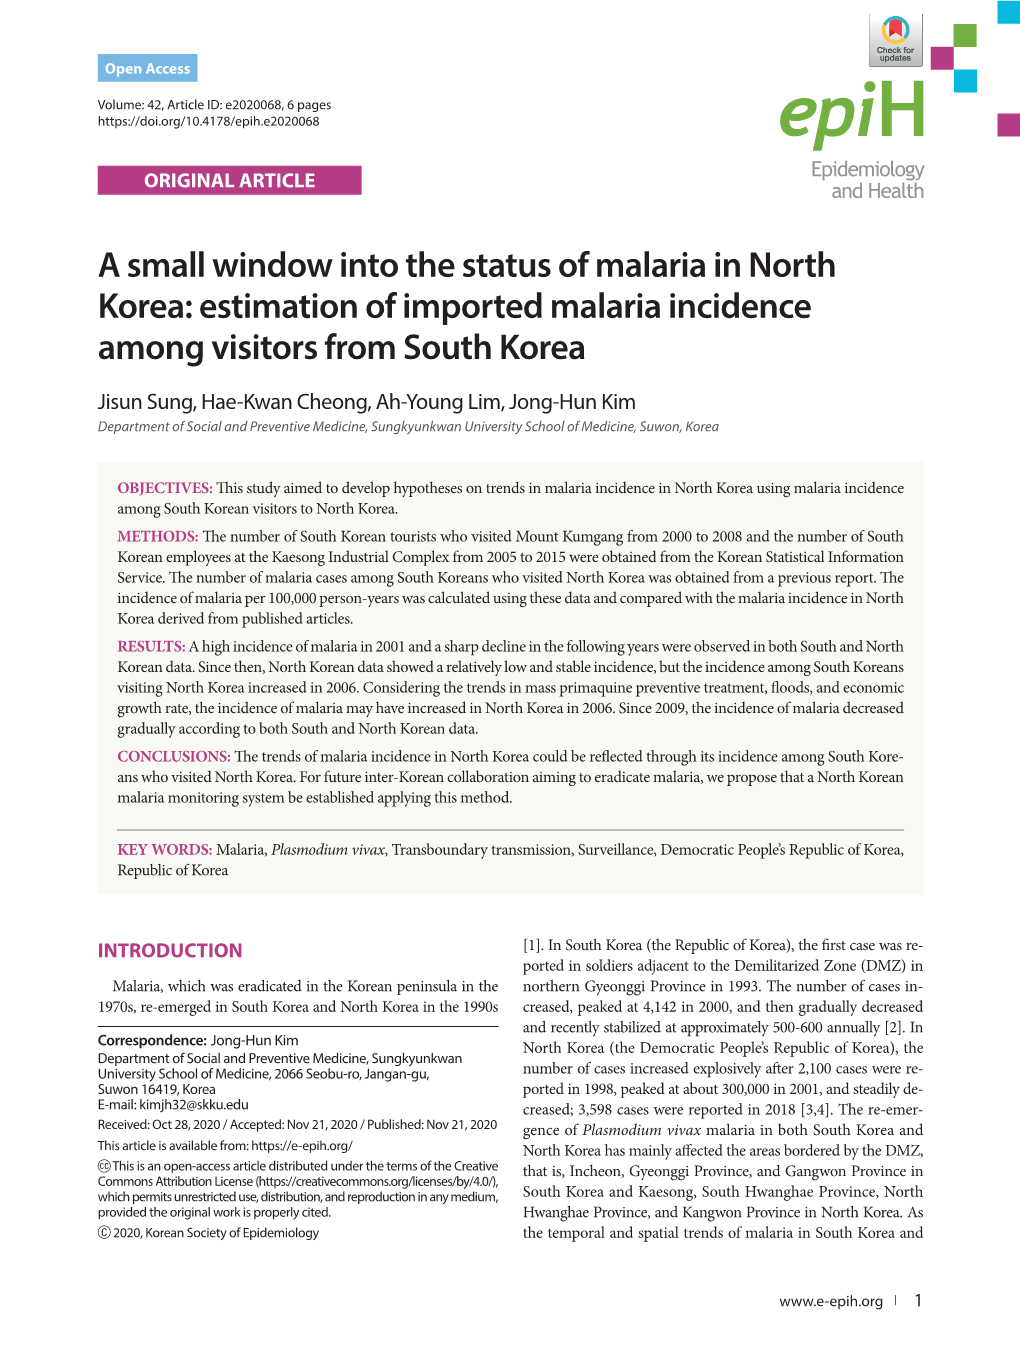 A Small Window Into the Status of Malaria in North Korea: Estimation of Imported Malaria Incidence Among Visitors from South Korea